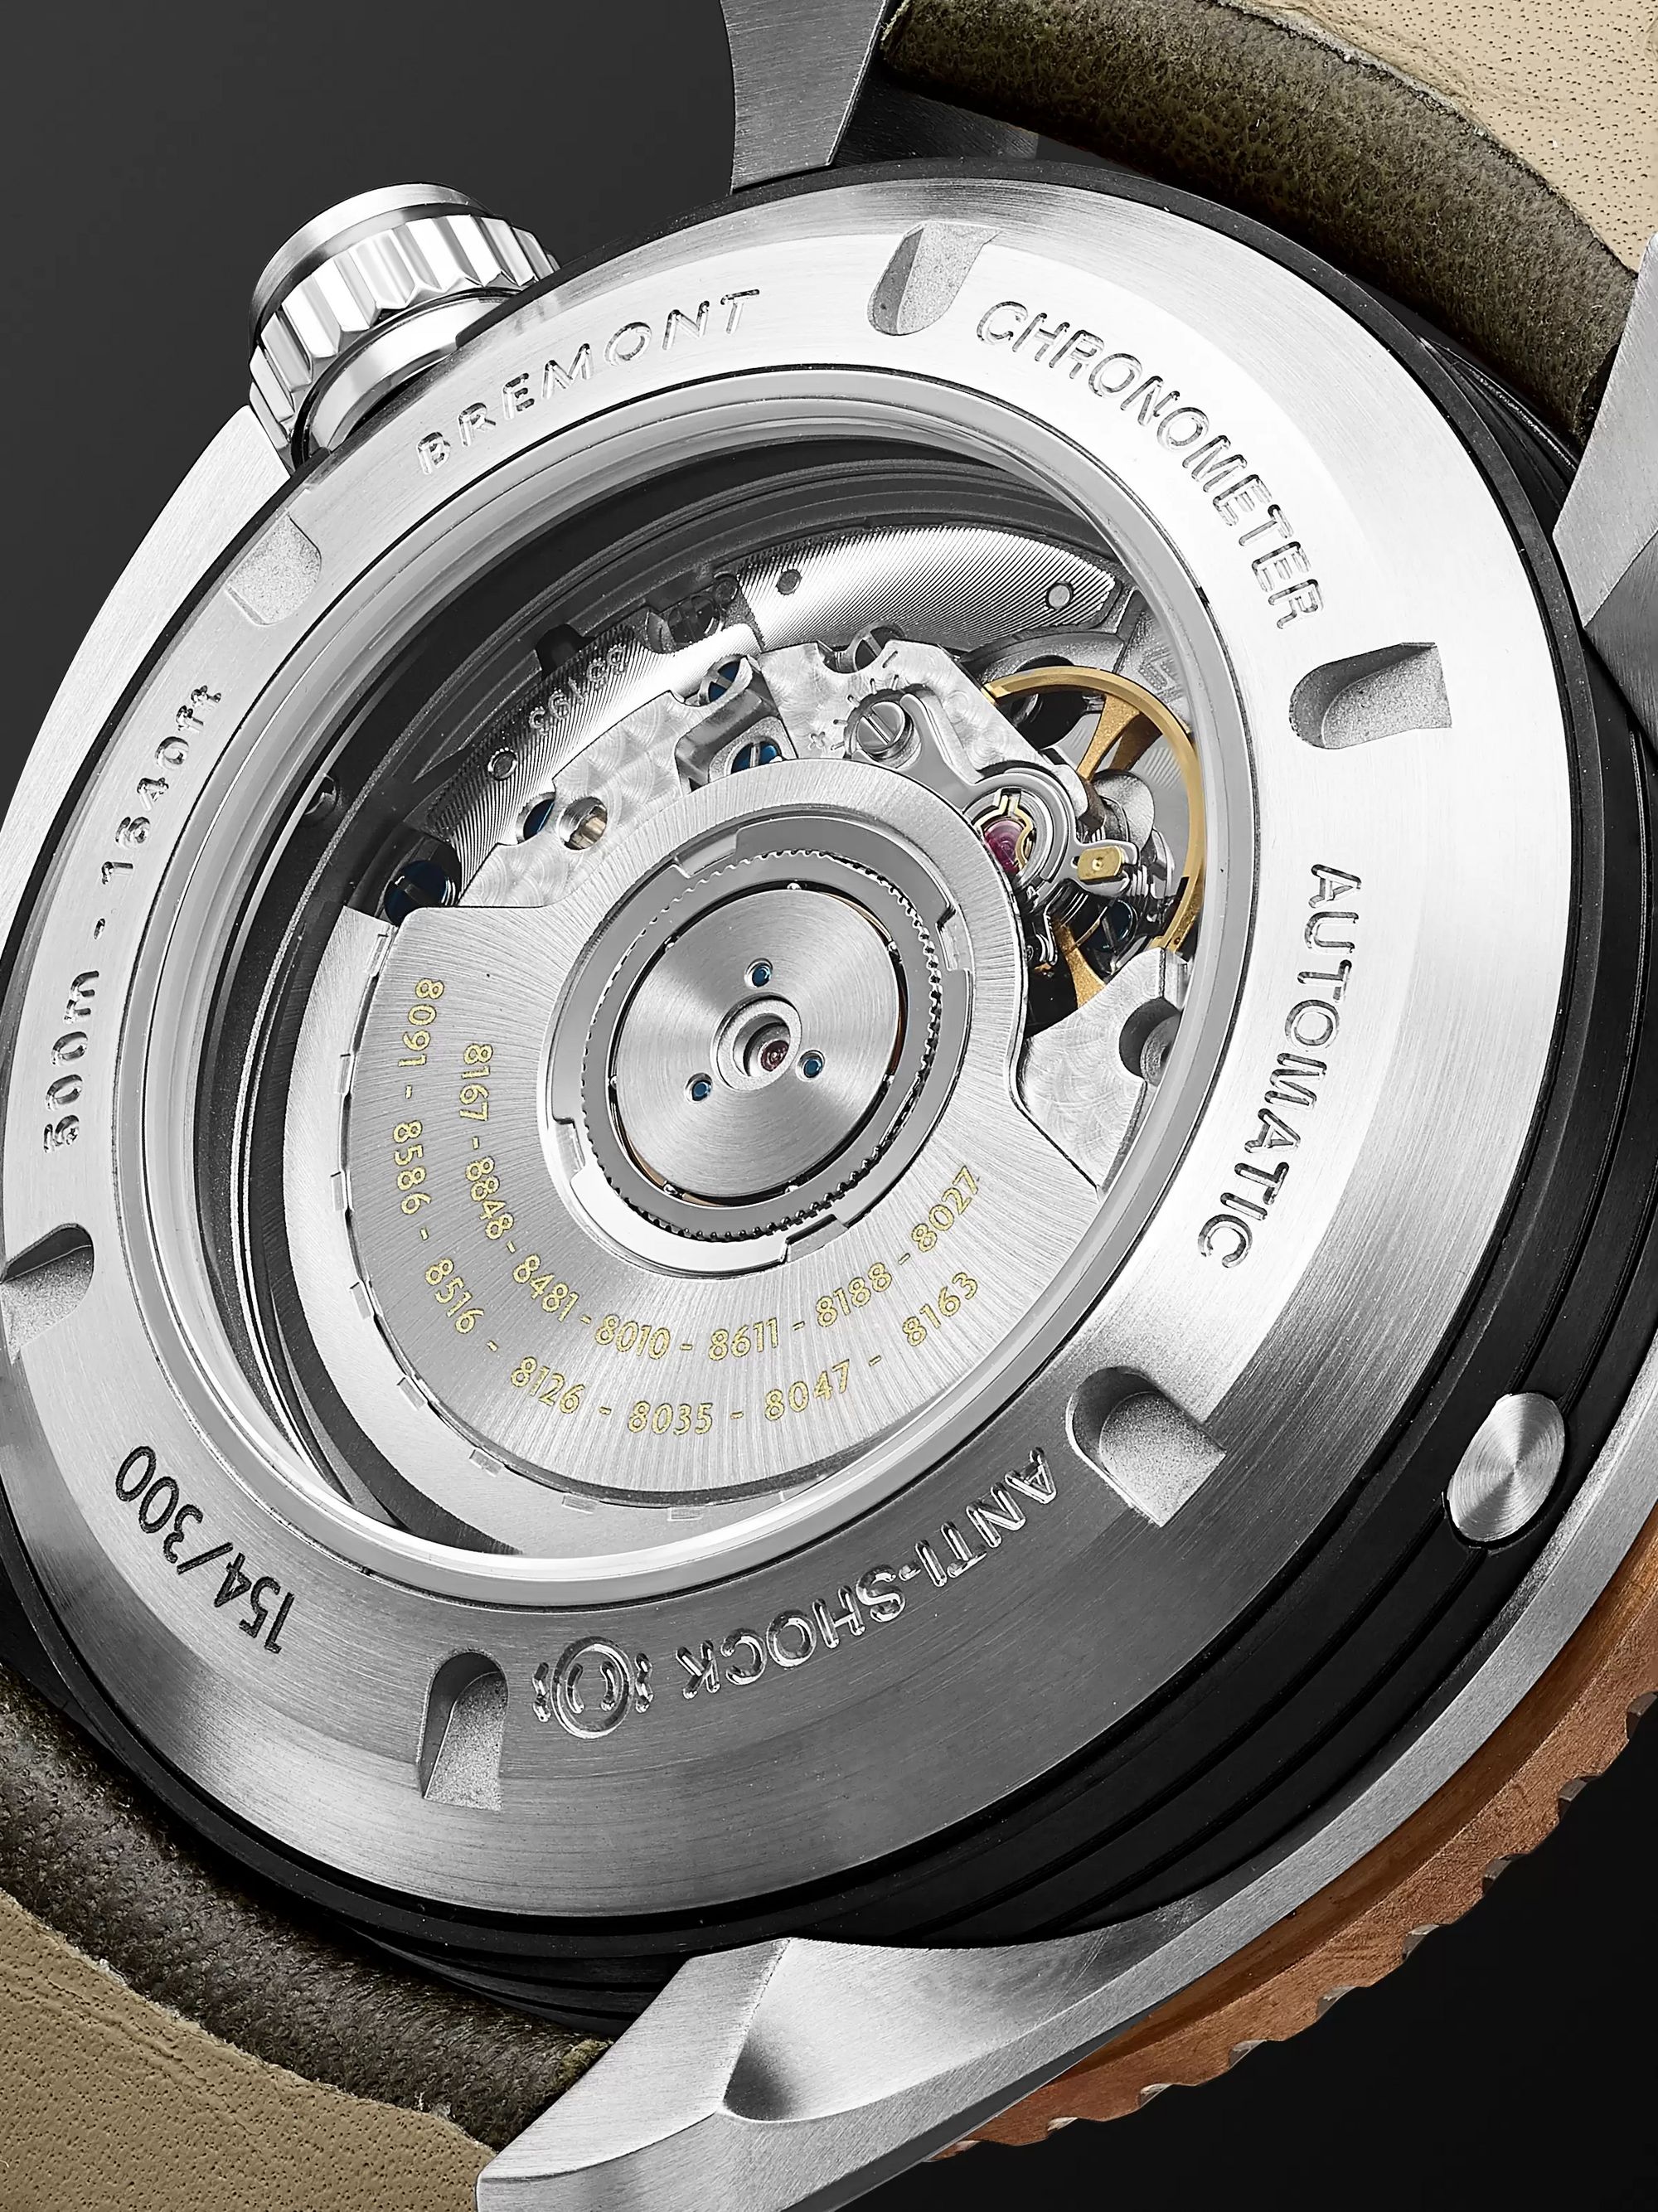 BREMONT Project Possible Limited Edition Automatic GMT 43mm Titanium, Bronze and Leather Watch, Ref. PROJECT-POSSIBLE-R-S